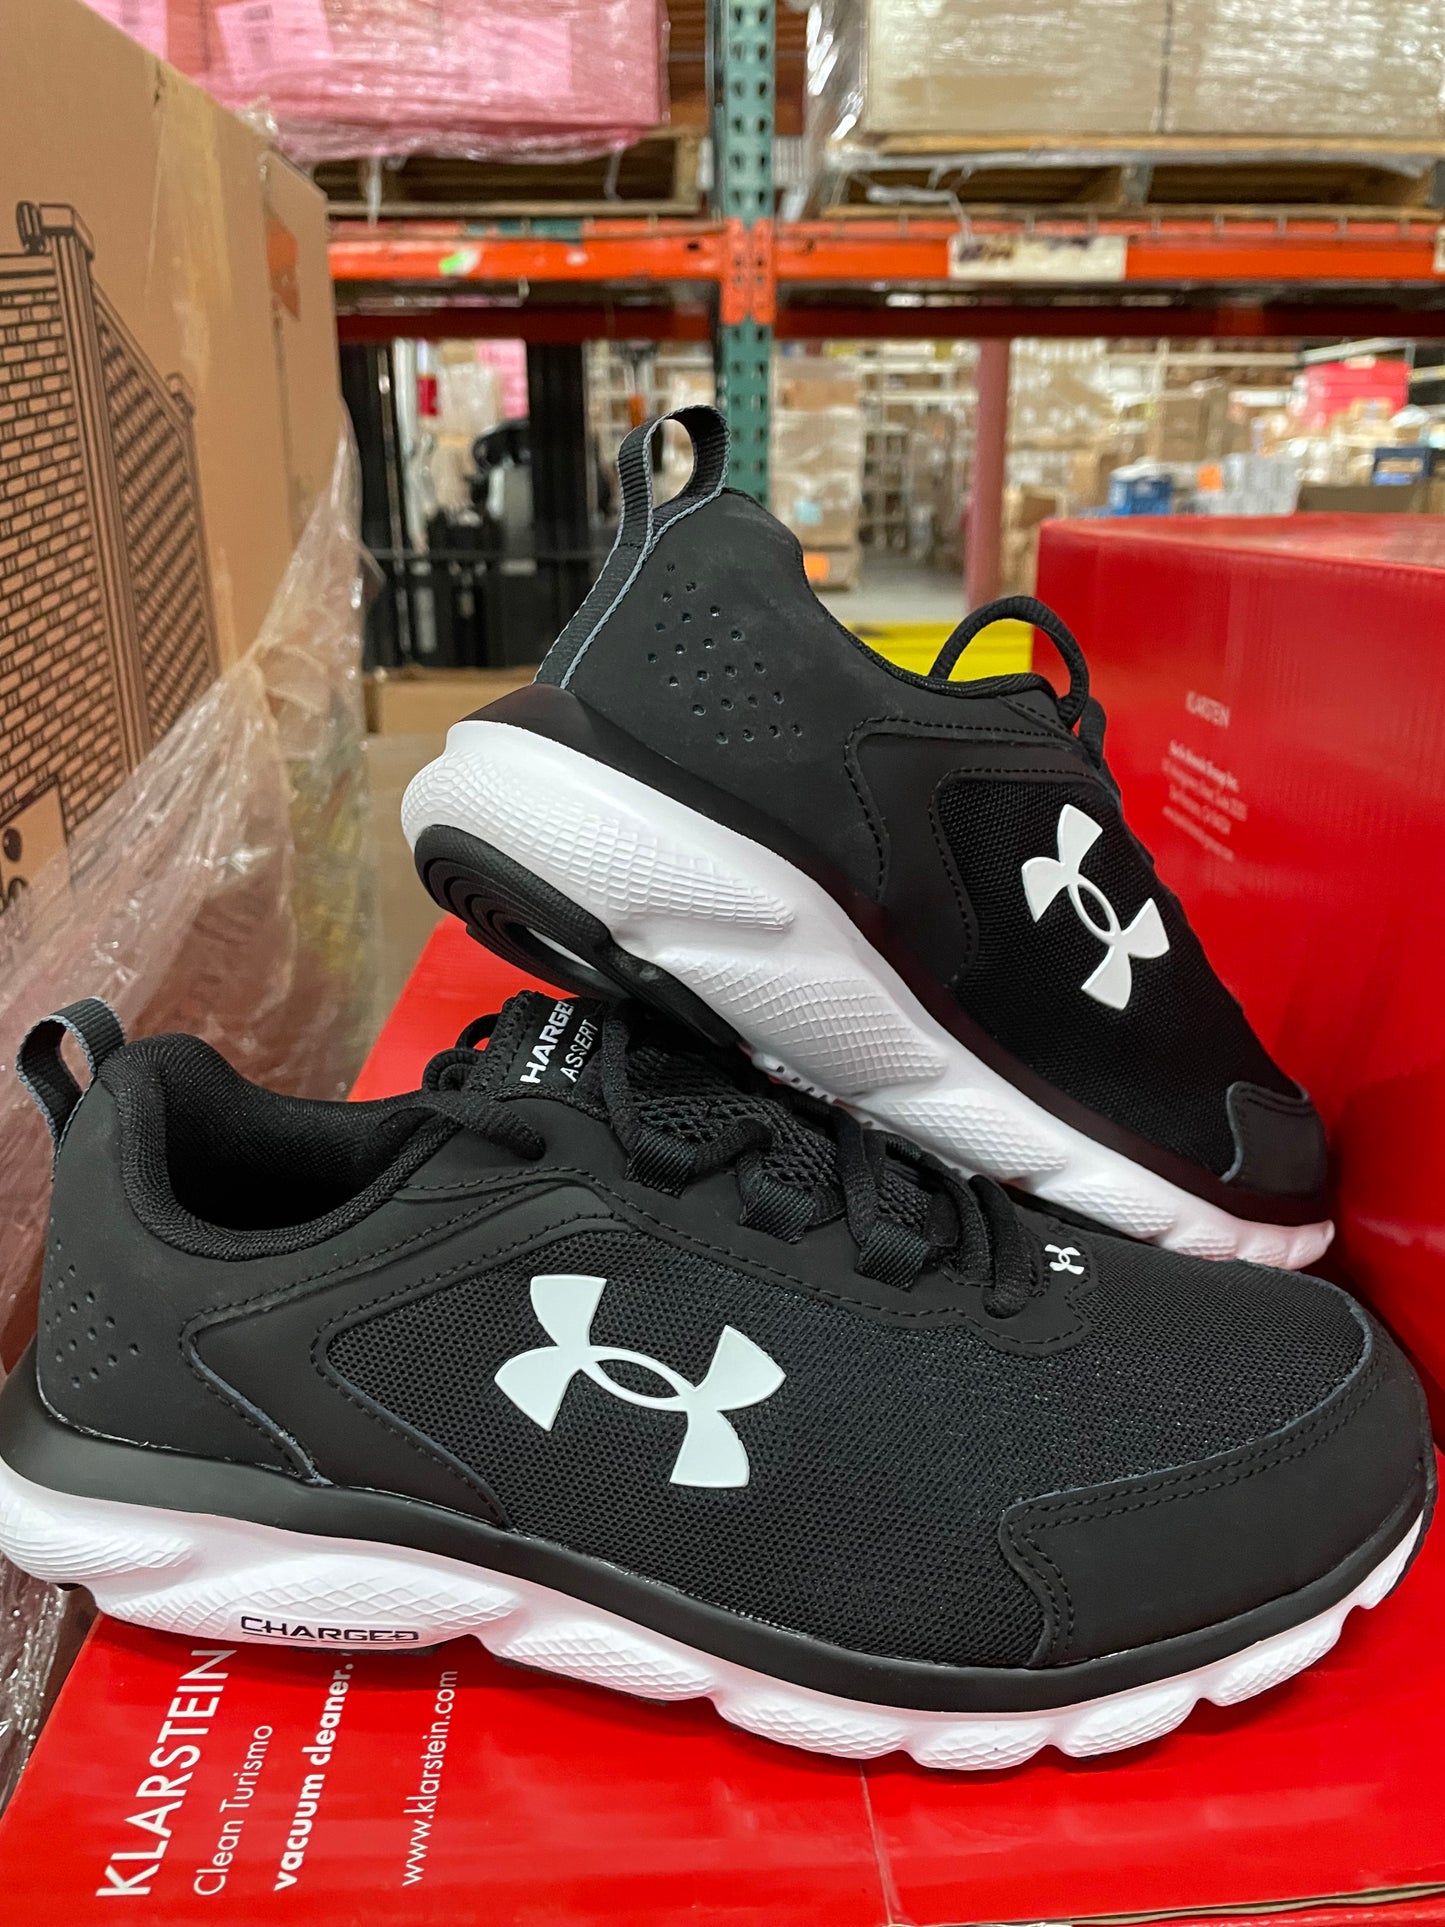 LOT #35 Under Armour Charged Assert 9 4E Running Shoes Black (Quantity 144. Retail $8640) PICKUP ONLY!